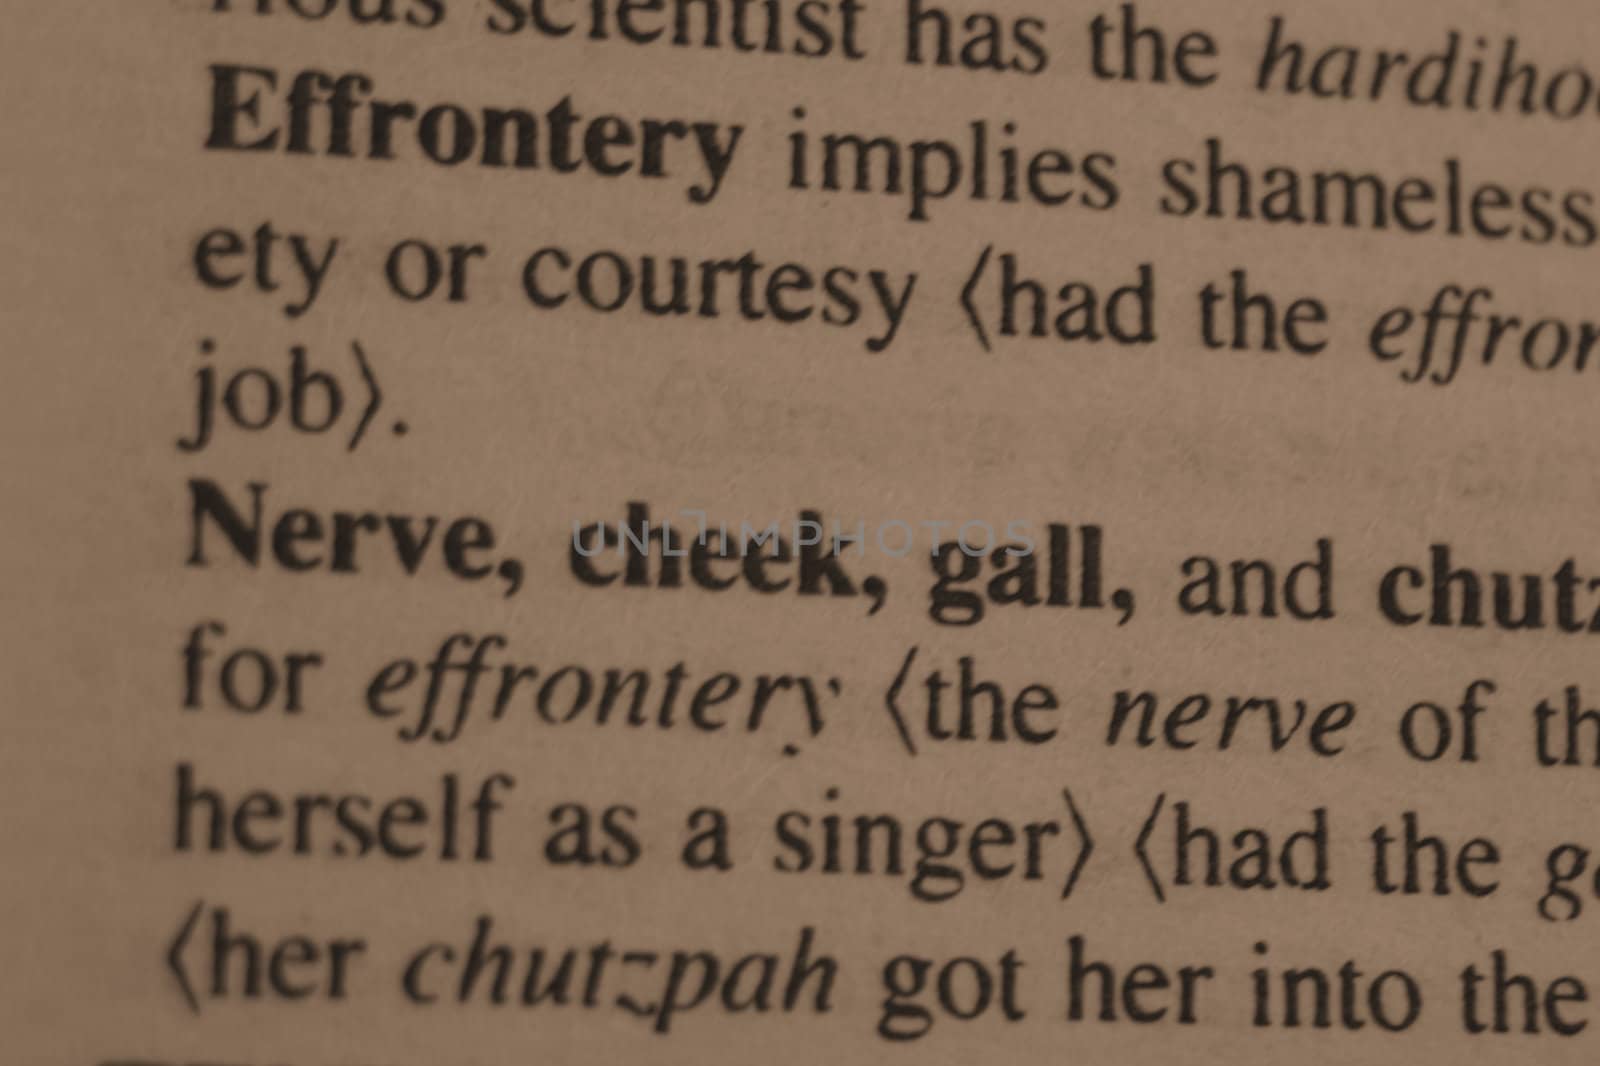 Nerve as seen in a dictionary